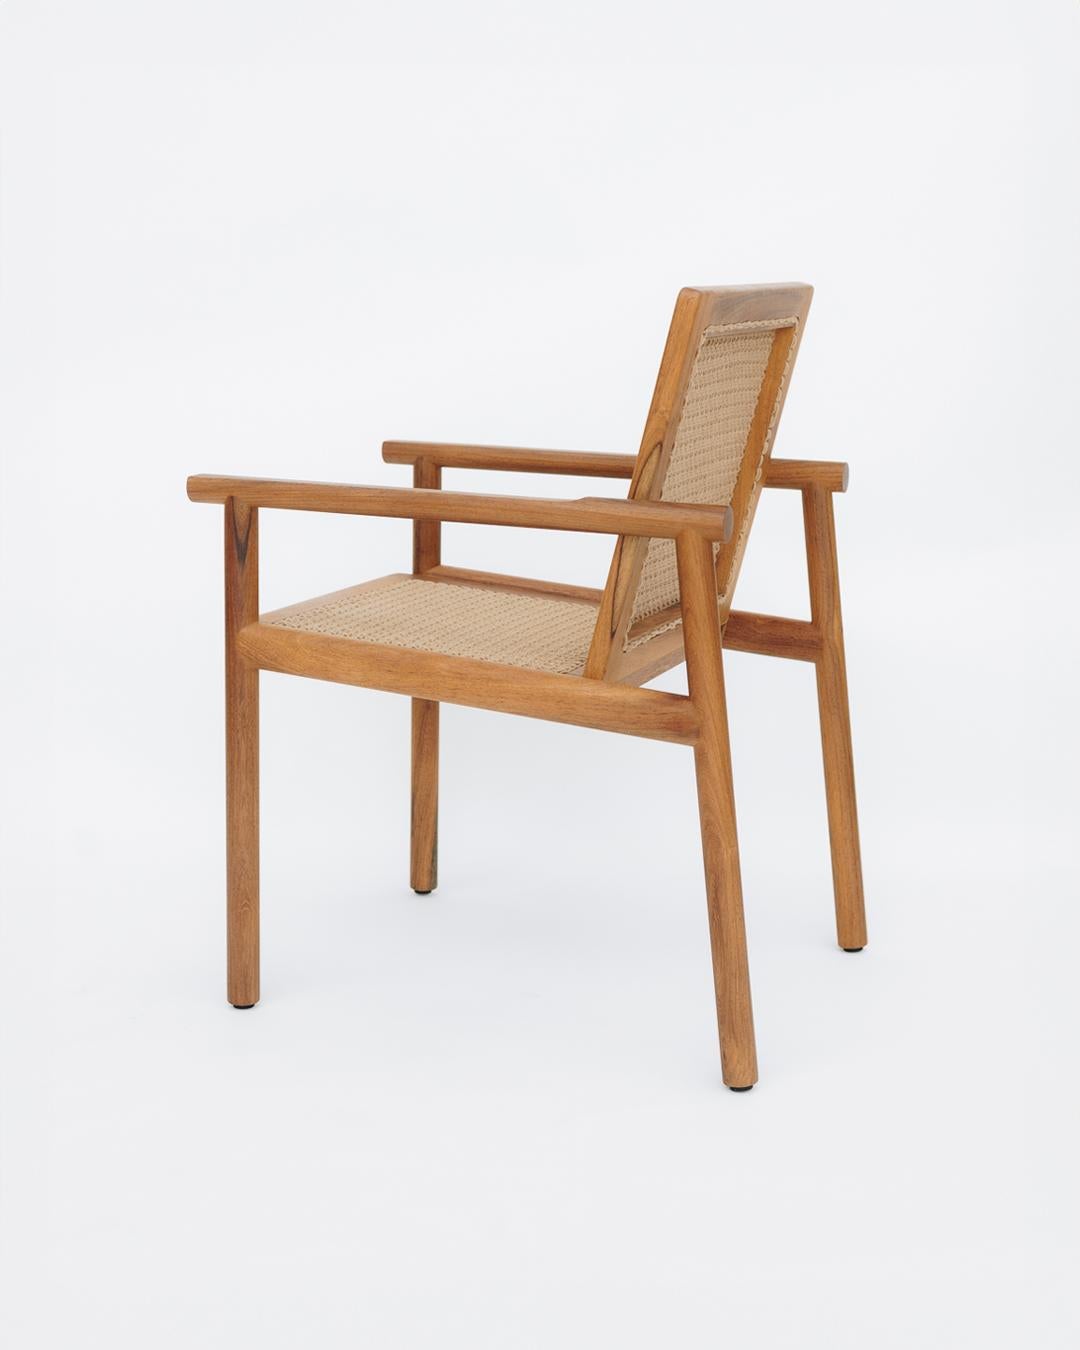 Mexican Hand-Woven Contemporary Chair in Jabim Tropical Wood, 1 in stock For Sale